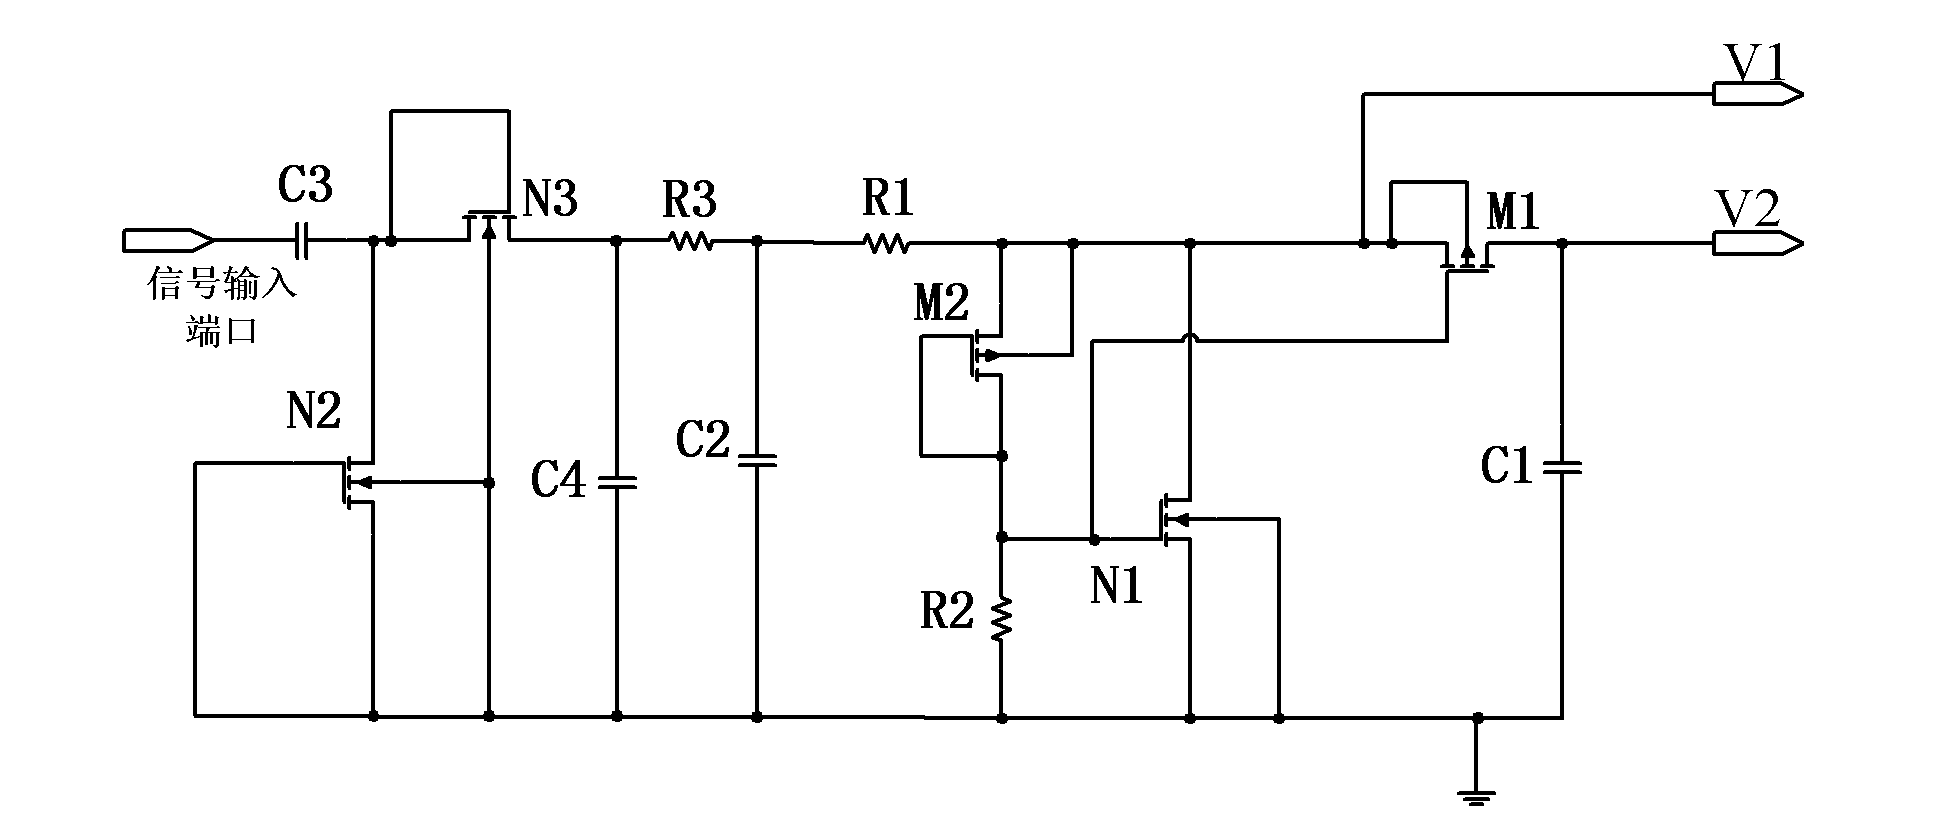 Demodulator circuit for the UHF (Ultrahigh Frequency) radio frequency identification label chip